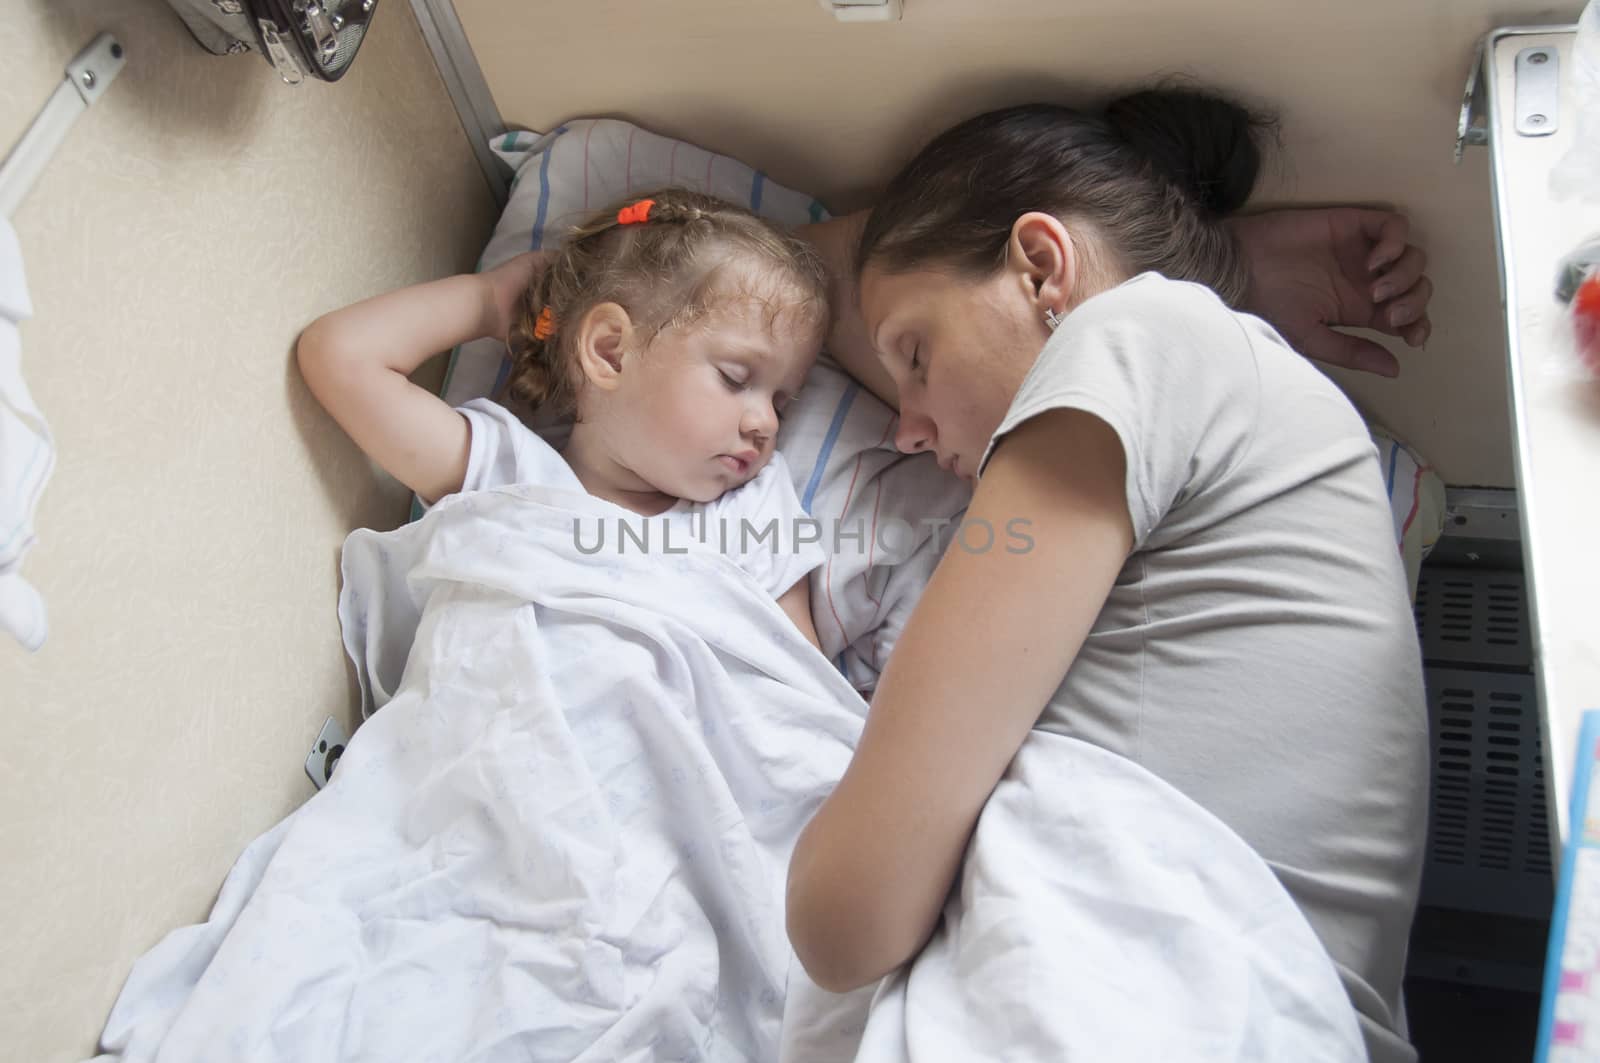 Mother and two year old daughter sleeping on a cot in a parlor car trains.